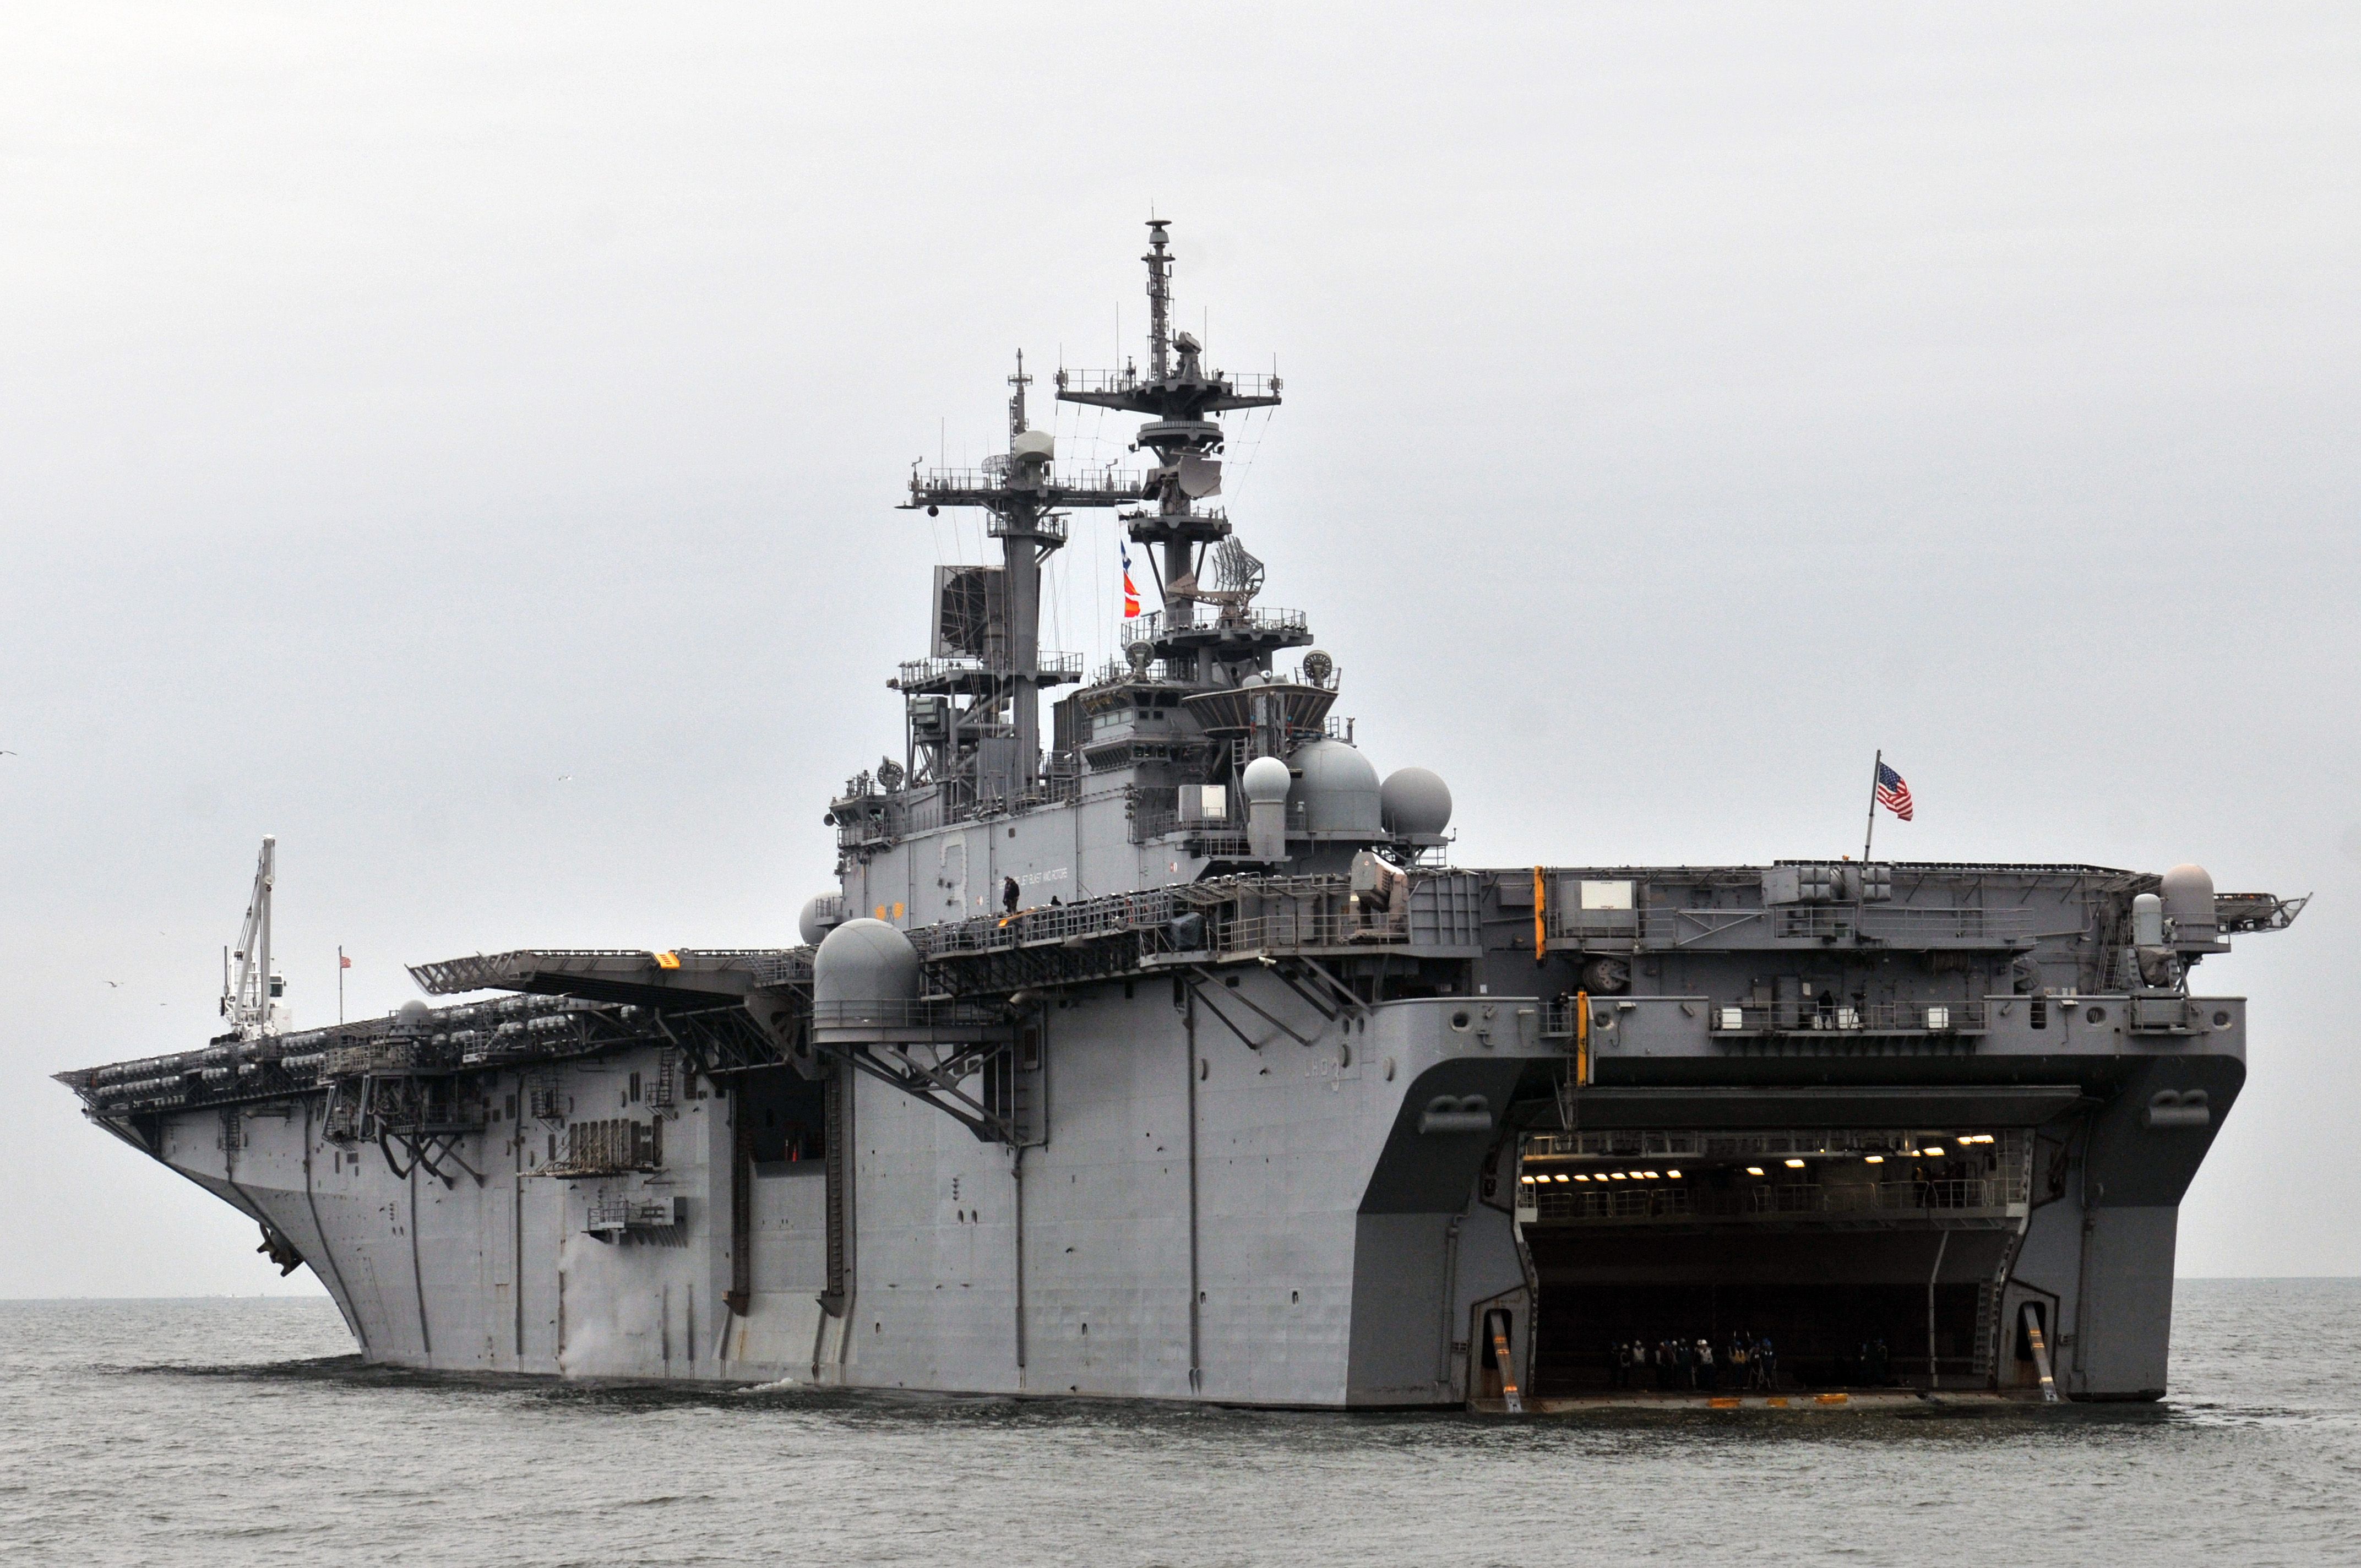 US_Navy_120109-N-UM734-392_The_amphibious_assault_ship_USS_Kearsarge_(LHD_3)_is_anchored_while...jpg